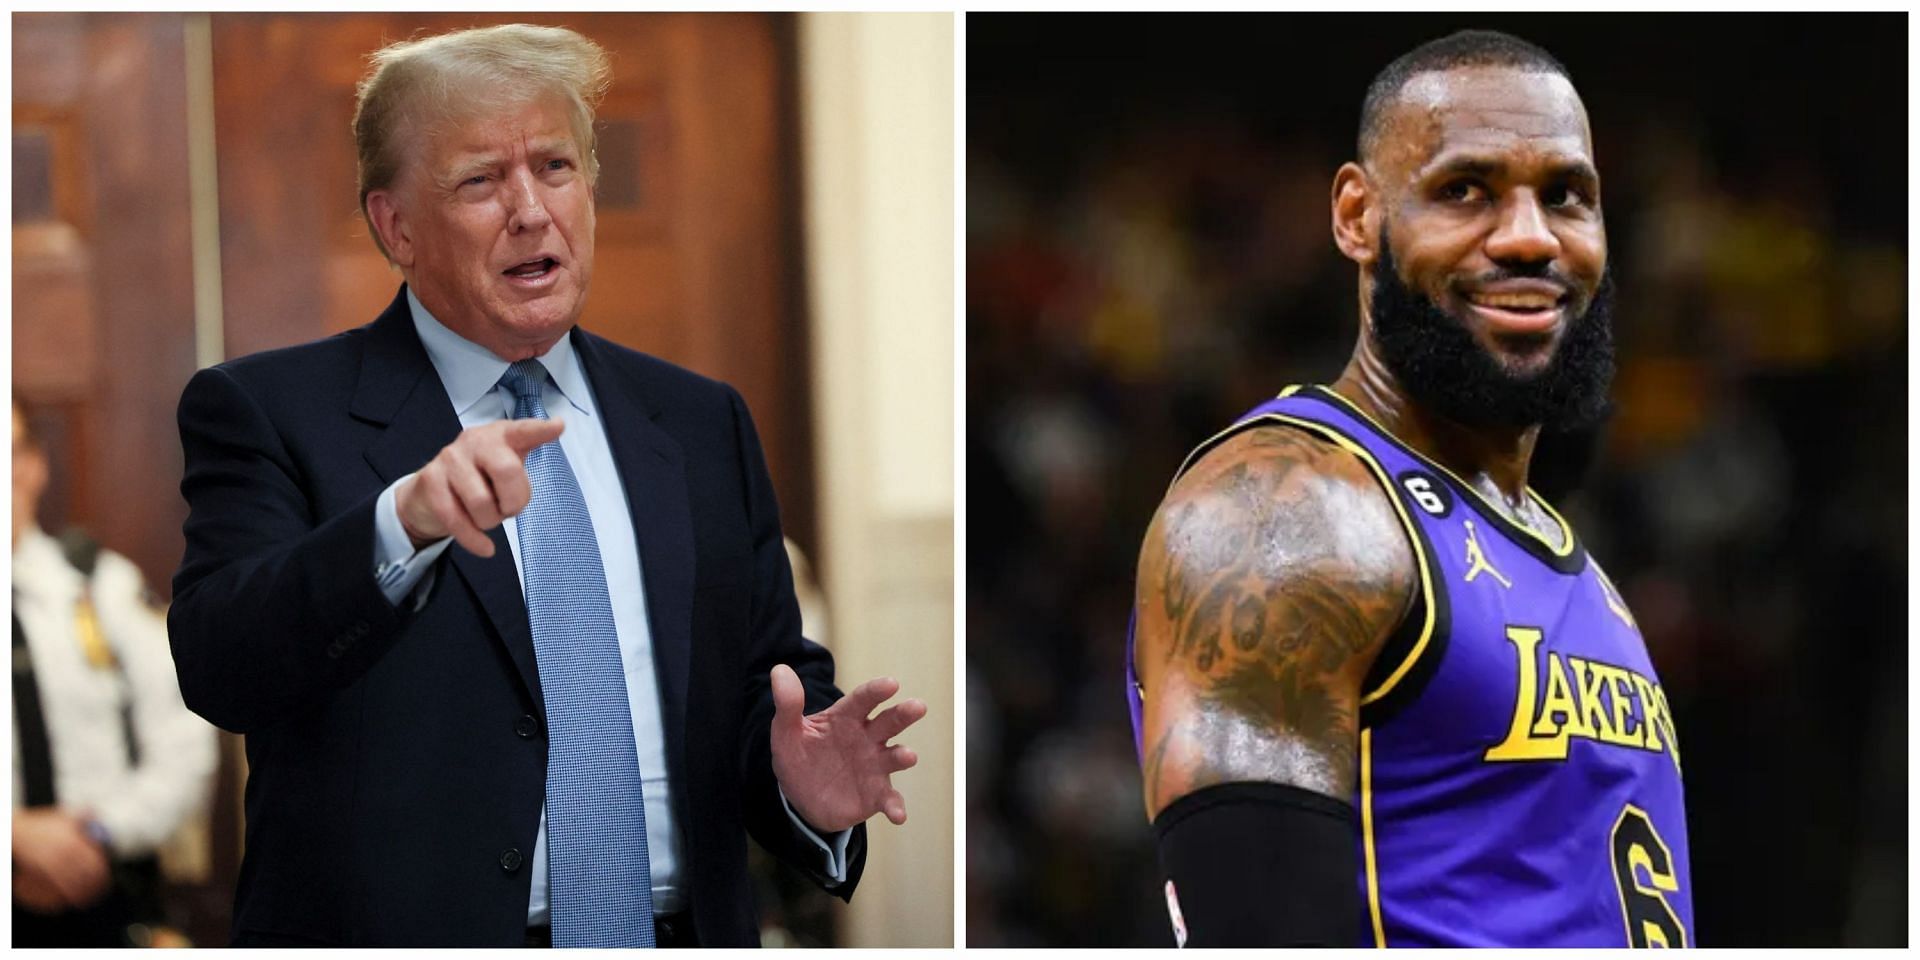 Donald Trump encouraged LeBron James to transition to join him in basketball